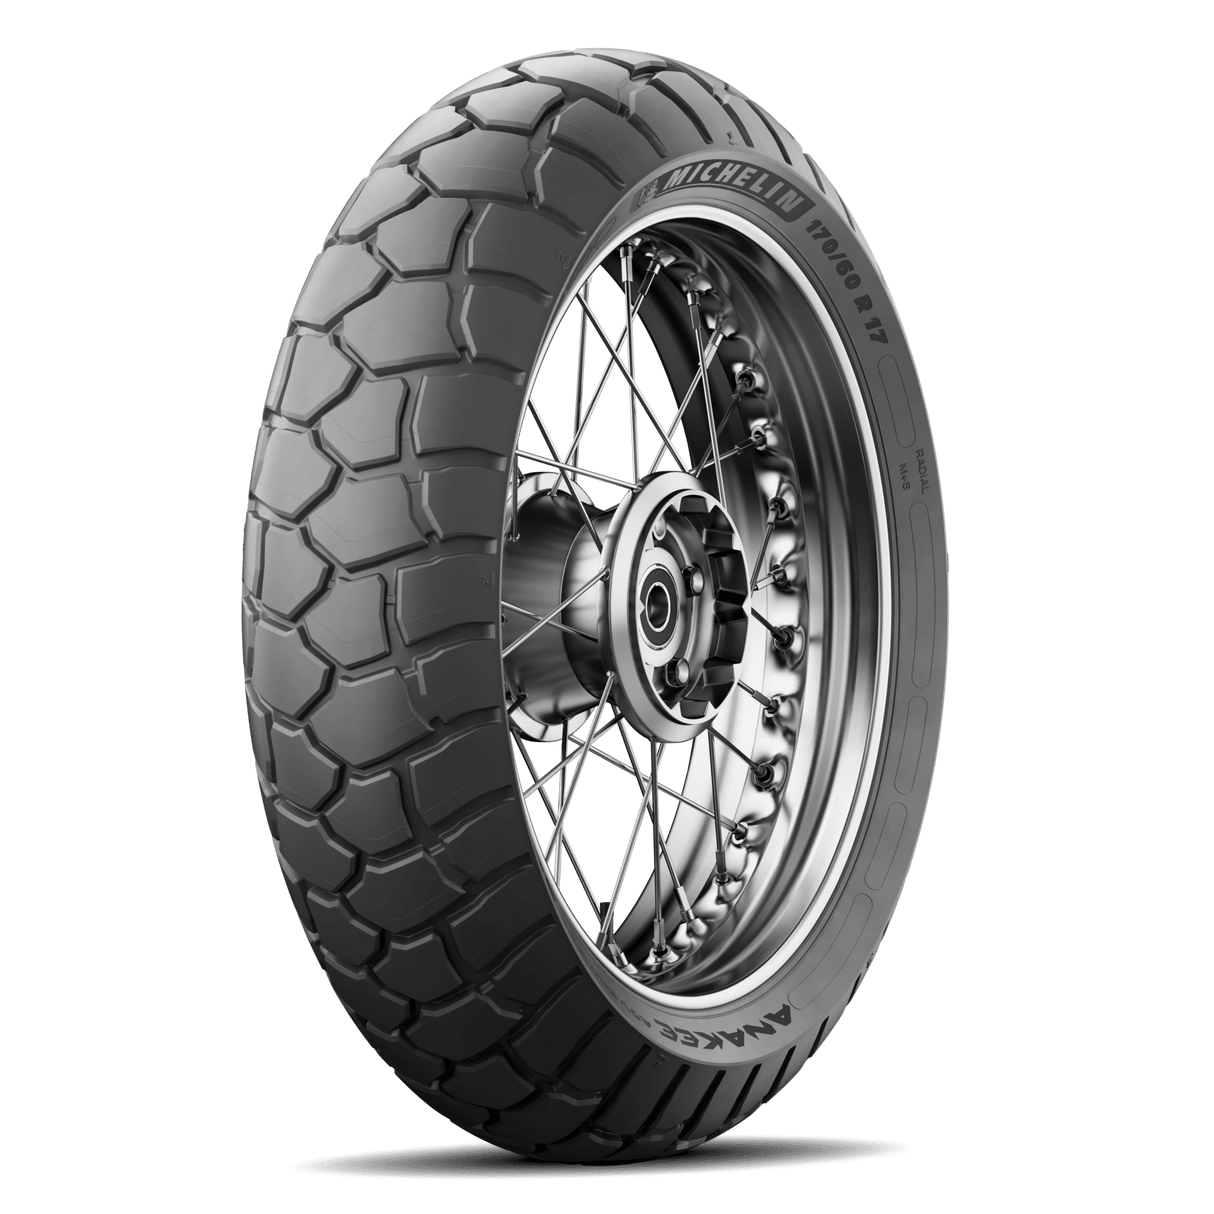 Michelin Anakee 150/70R-17 69V Rear Adventure Tyre